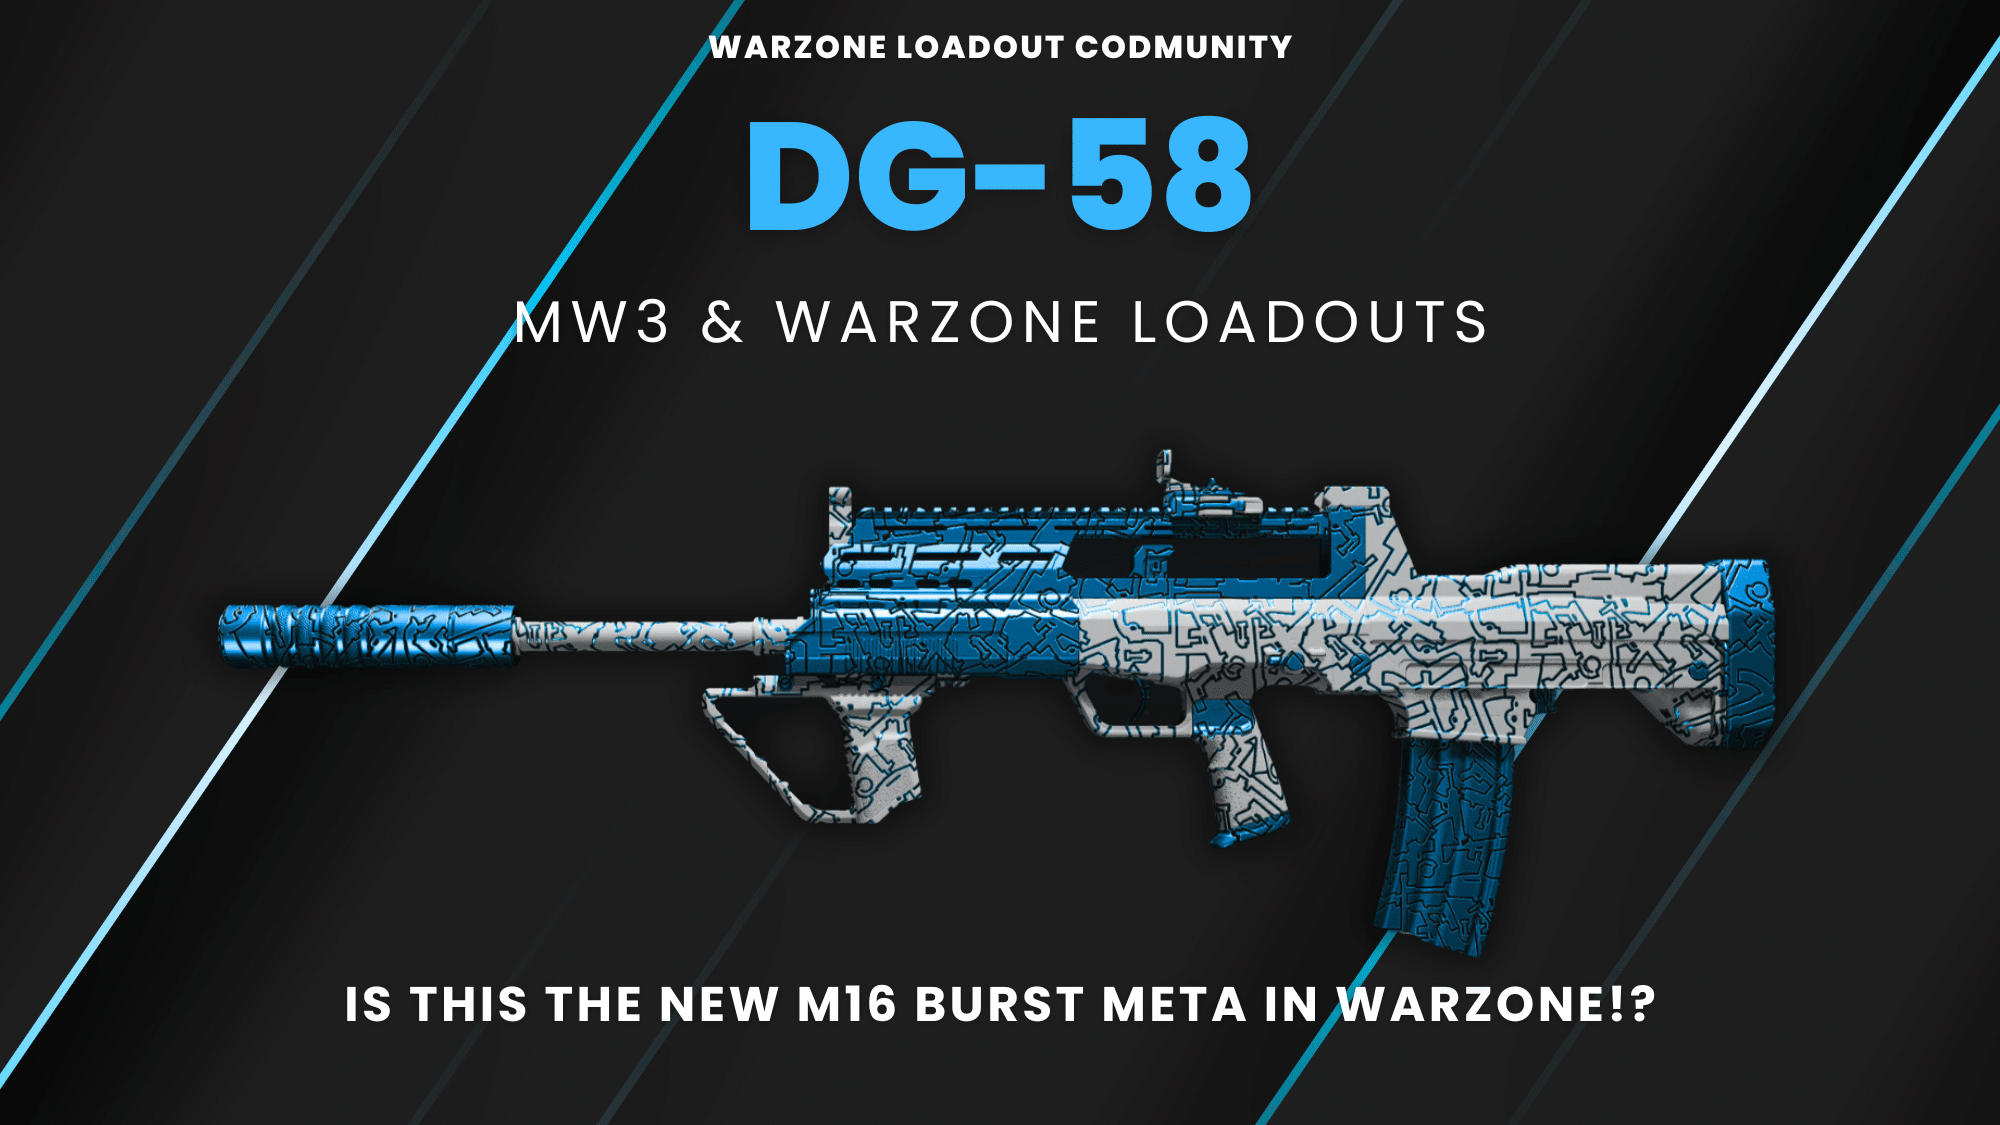 DG-58 Best Loadouts and Builds for MW3, Zombies, and upcoming Warzone's Meta Burst!